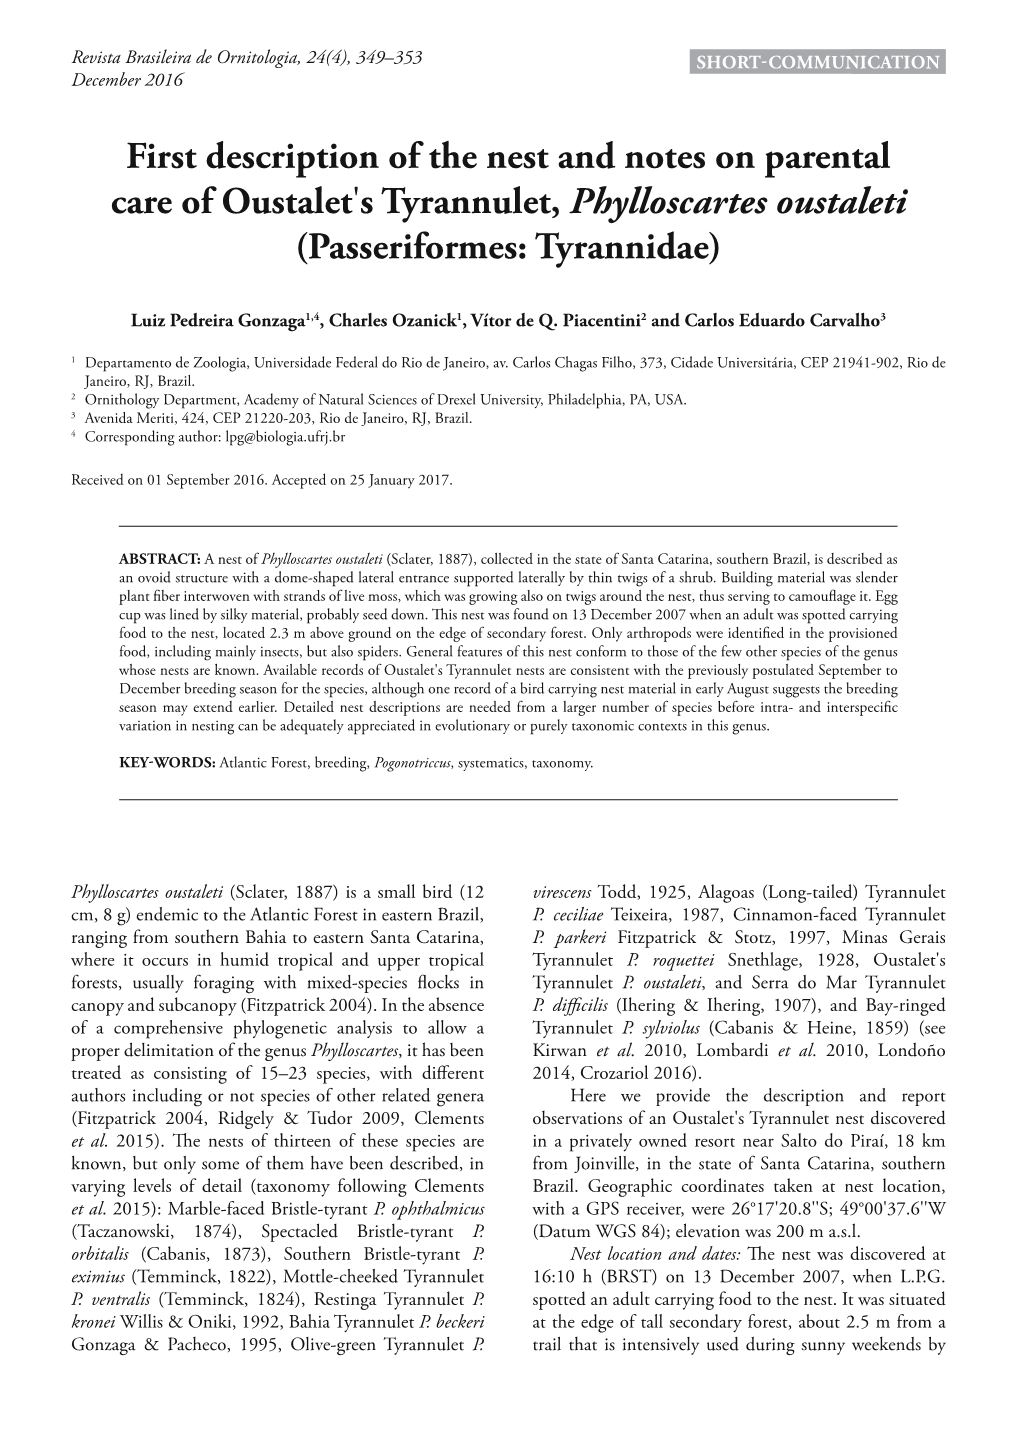 First Description of the Nest and Notes on Parental Care of Oustalet's Tyrannulet, Phylloscartes Oustaleti (Passeriformes: Tyrannidae)